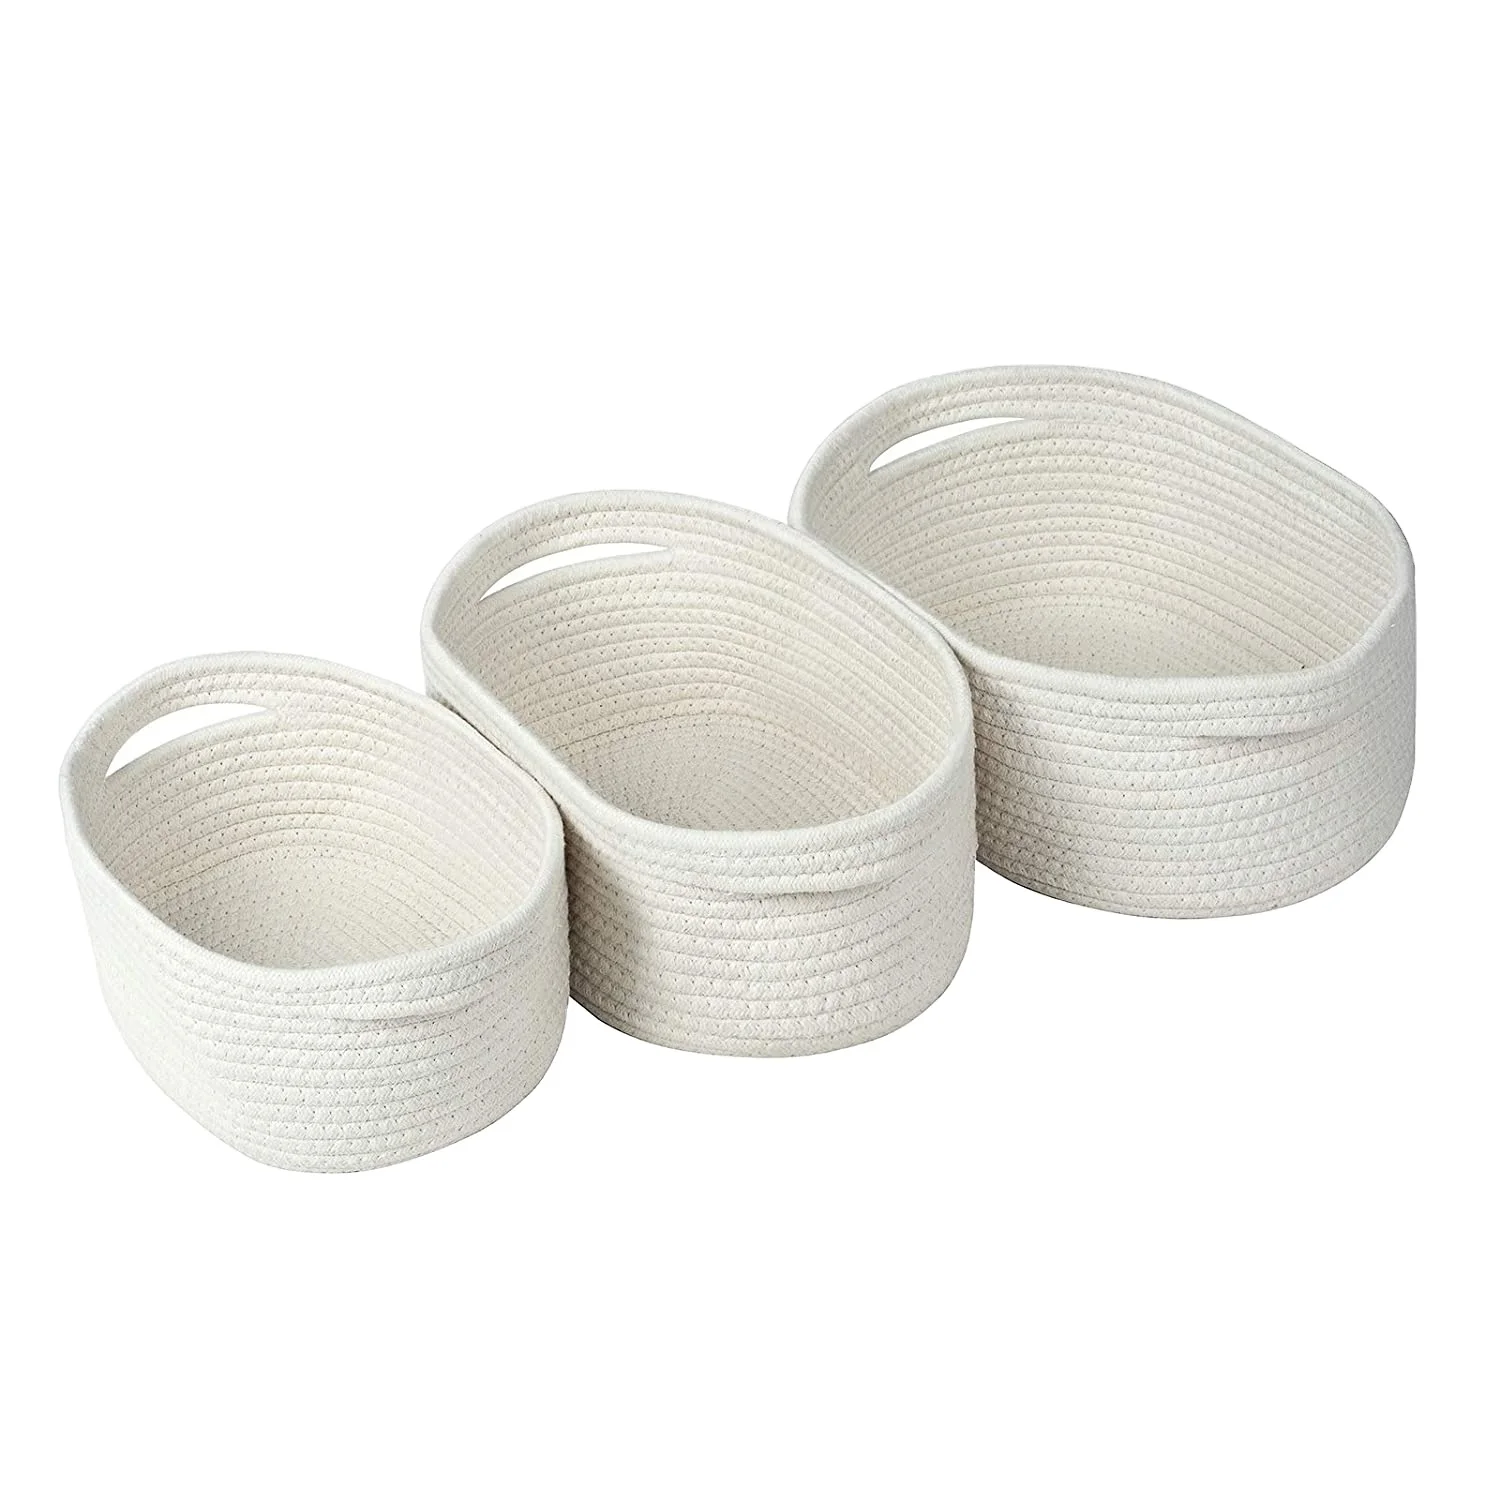 

White Storage Basket Set of 3 Soft Woven Cotton Rope Shelf Baskets with Handles Organizer Basket Sets for Laundry Toys Books